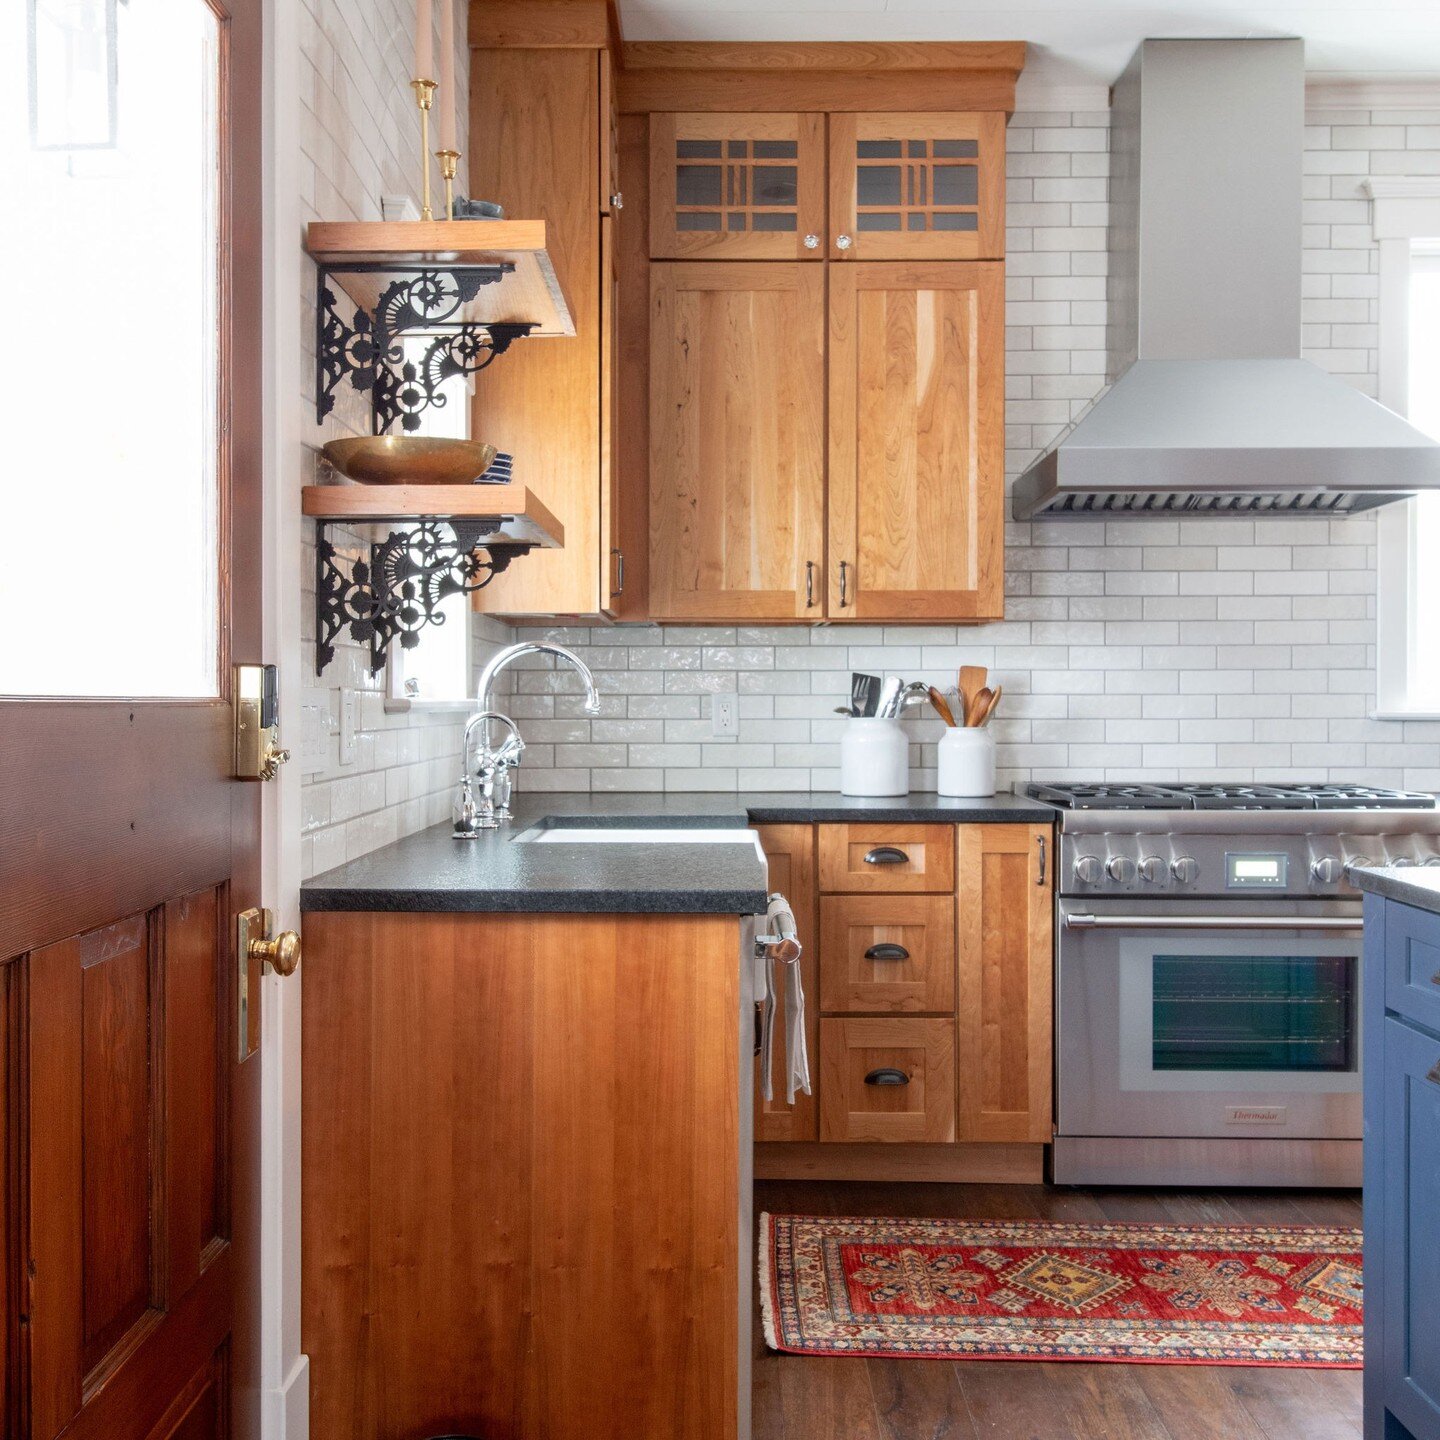 Warm wood tones and eclectic details for this historic kitchen remodel in Montana.

Photo by @jlowryvizzutti 

#bellinghaminteriordesign #bellinghaminteriordesigner #historicremodel #historicrenovation #pnwinteriordesign #montanainteriordesign #white